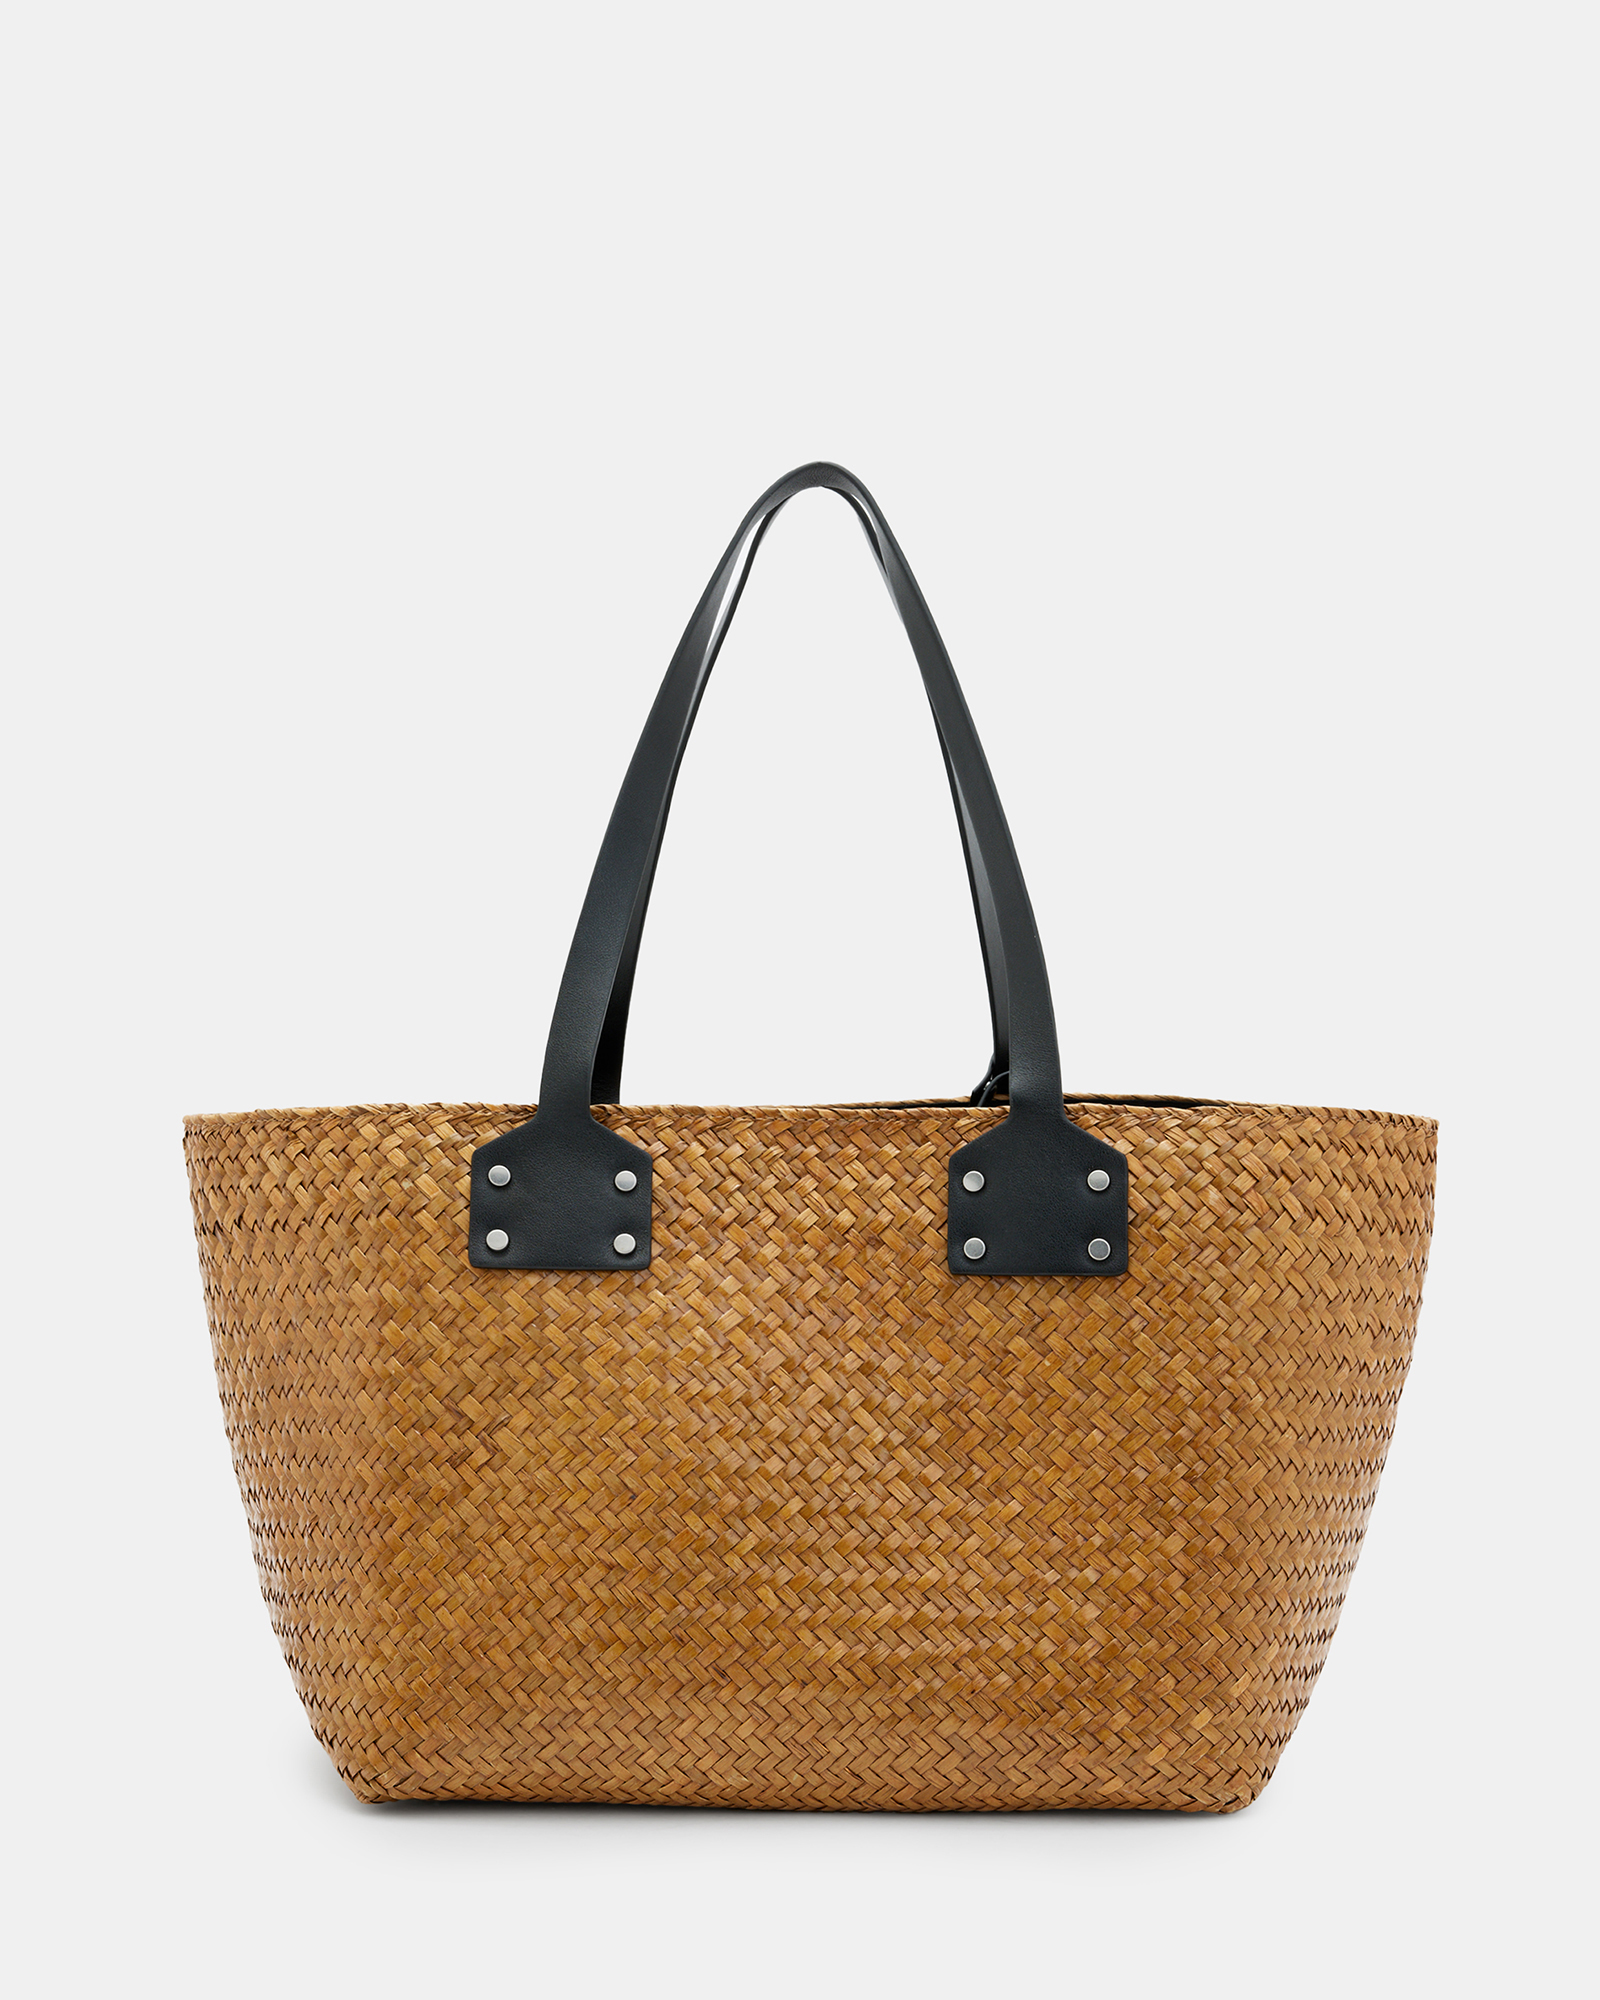 AllSaints Mosley Straw Tote Bag,, ALMOND BEIGE